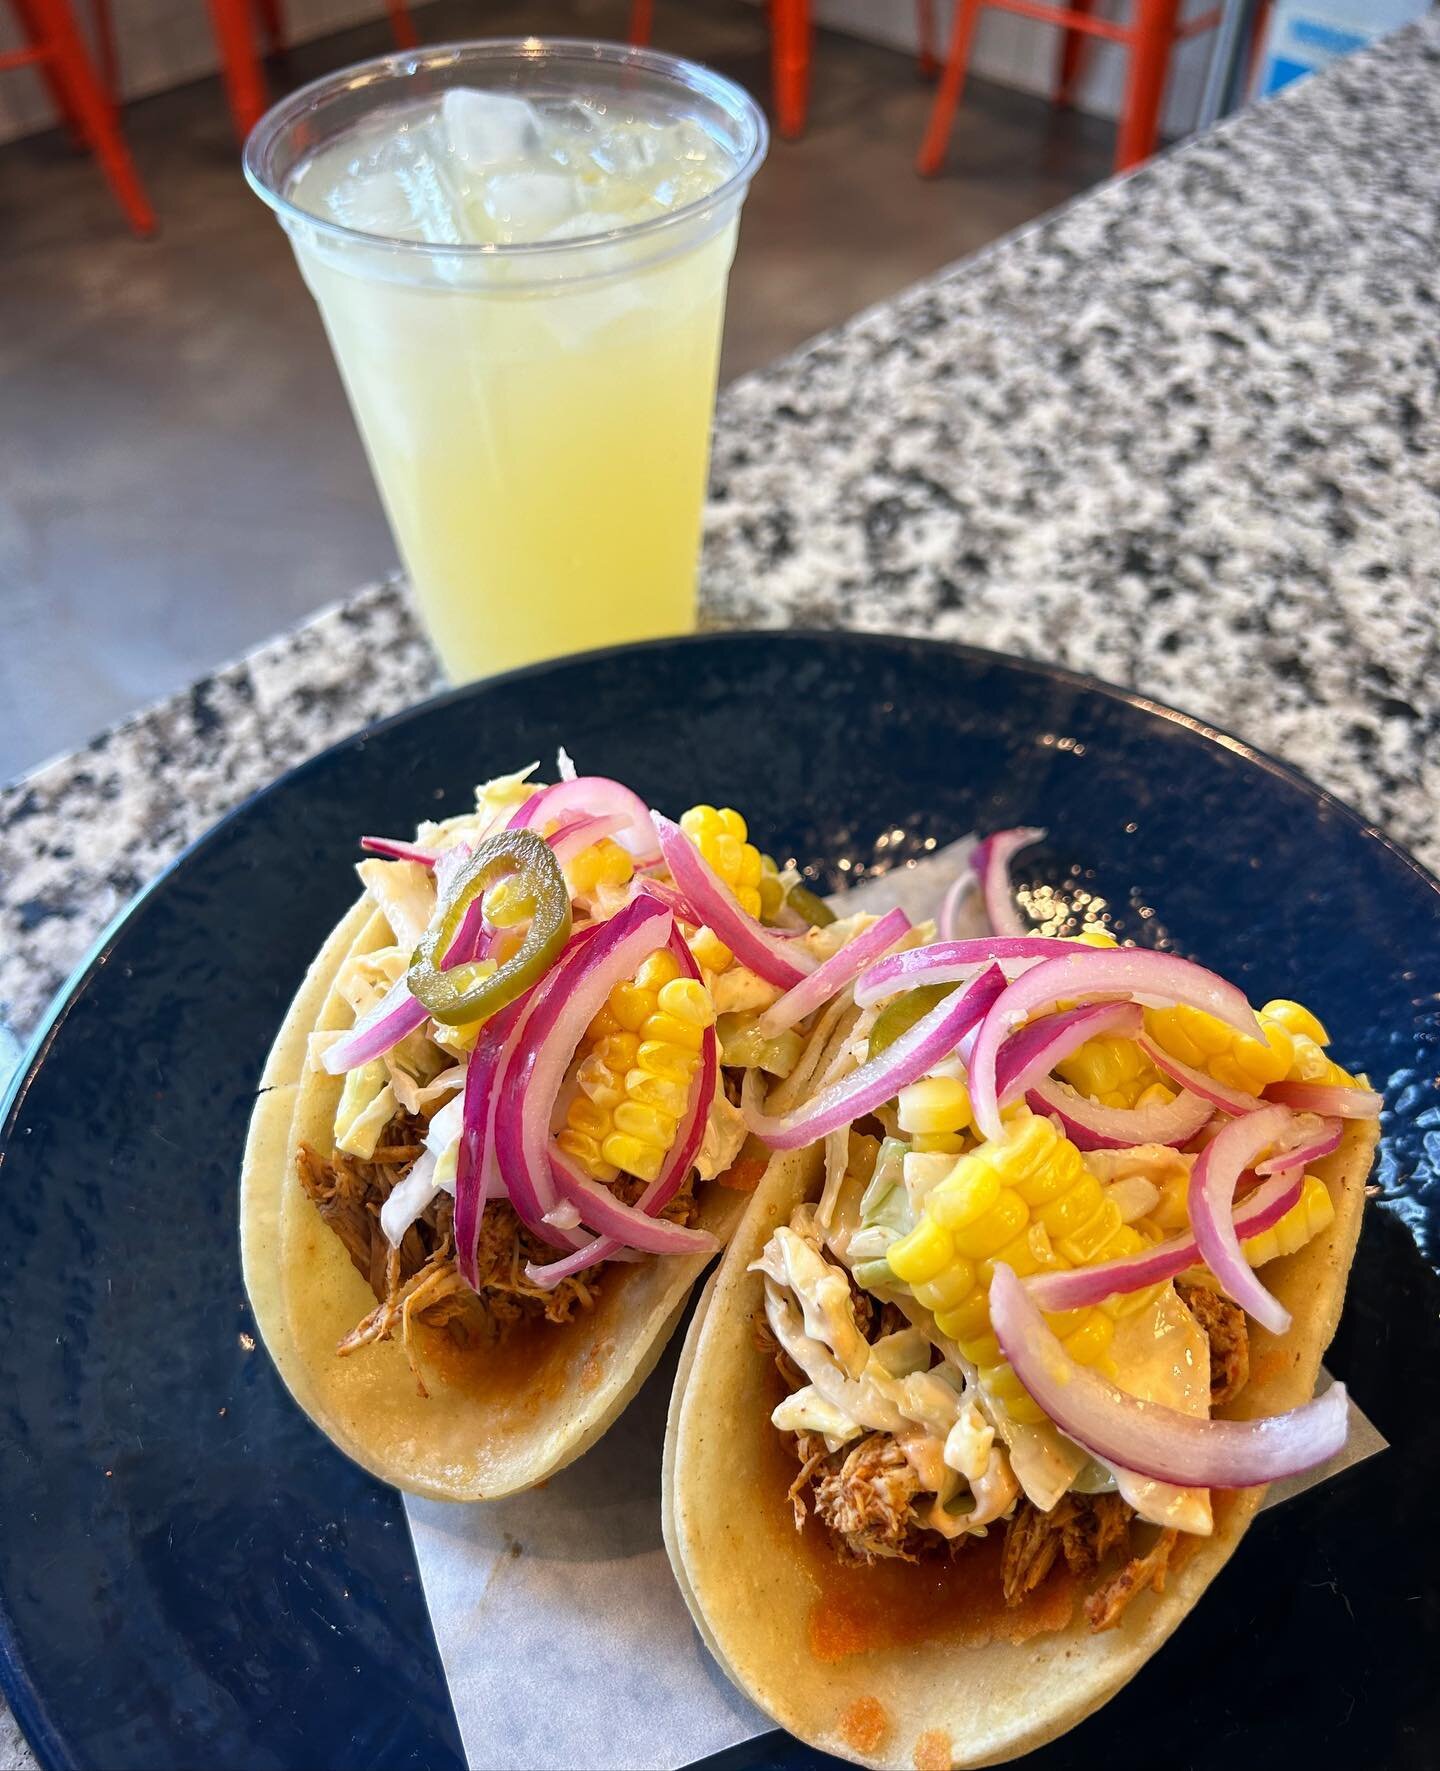 Today&rsquo;s Special 
2 Shredded Chicken Tacos with Chipotle Slaw and Corn Pico- comes with our Passion Fruit Agua Fresca &hellip; 10$ 

Contact us For large orders or caterings 
boca31.fortworth@gmail.com 

(817) 862-9700

#tacos #special #dailyspe